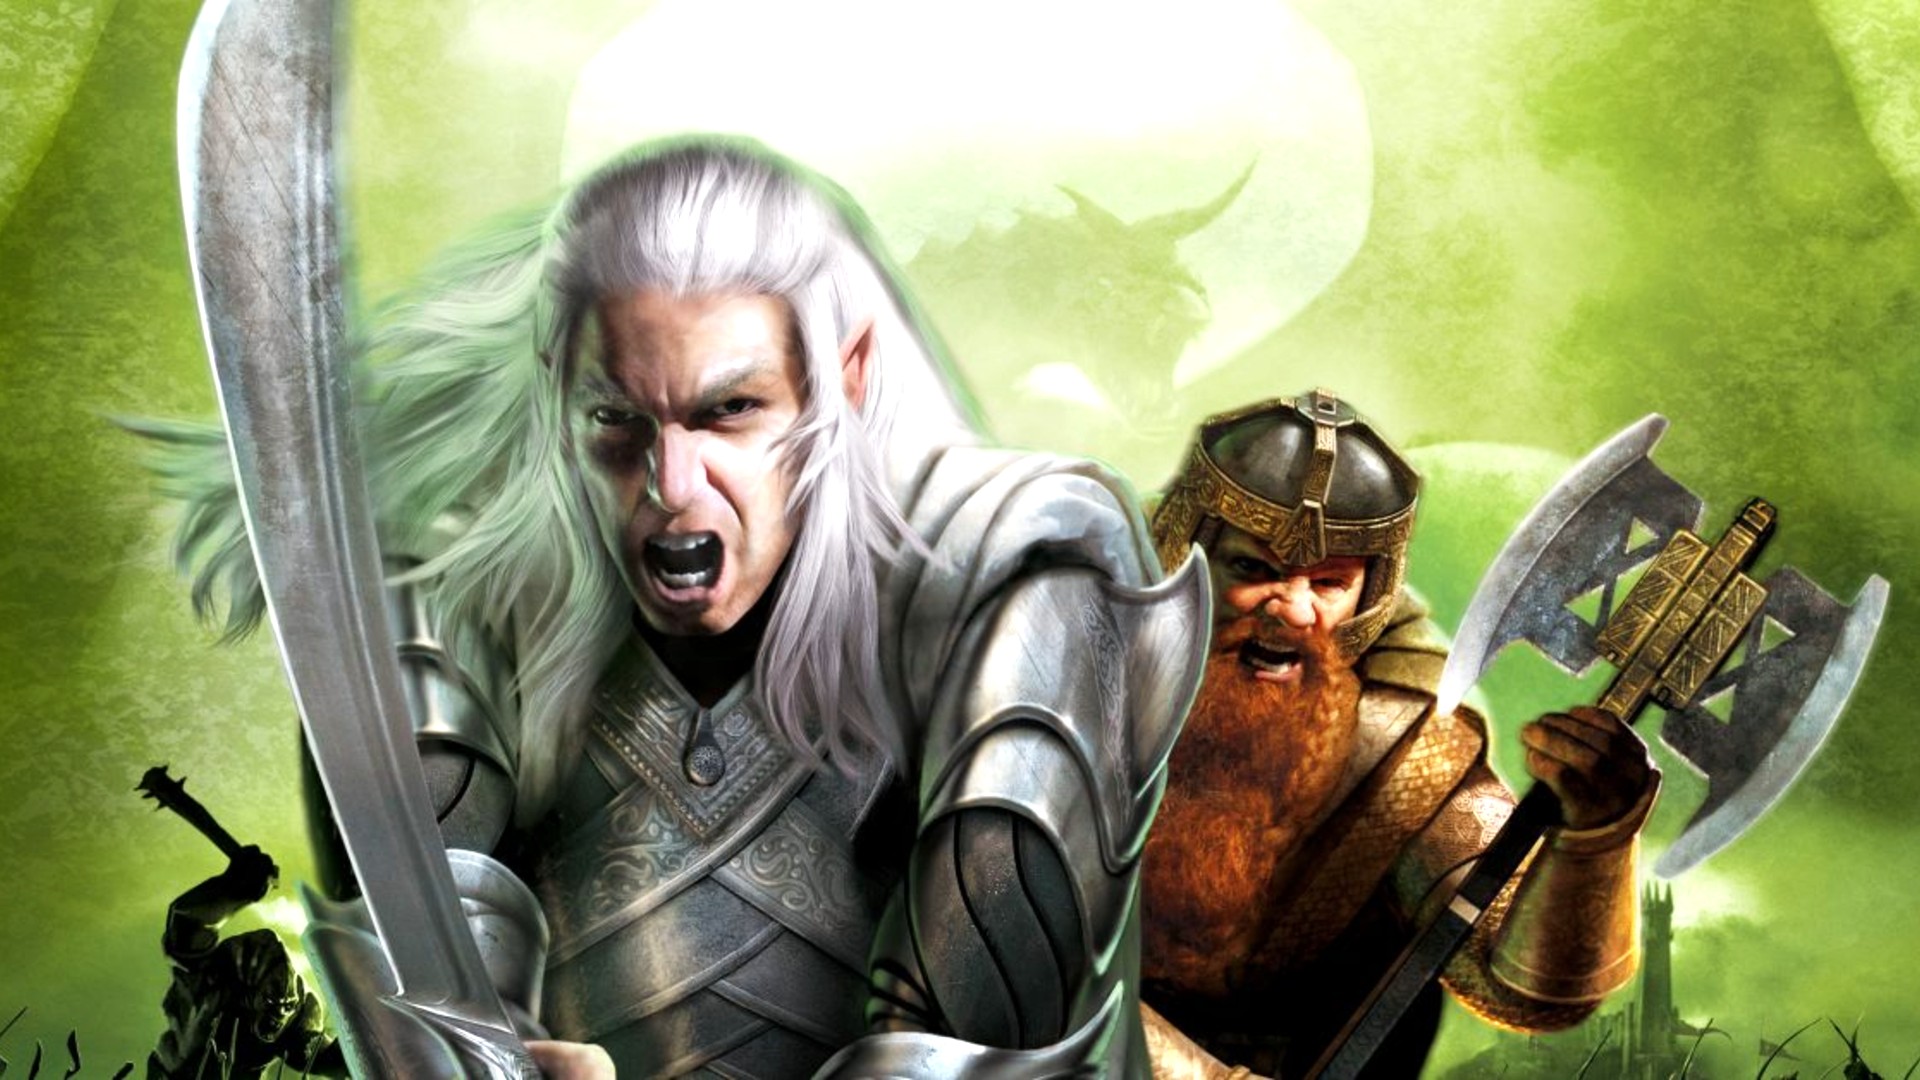 The Battle for Middleearth II was the greatest Lord of the Rings game